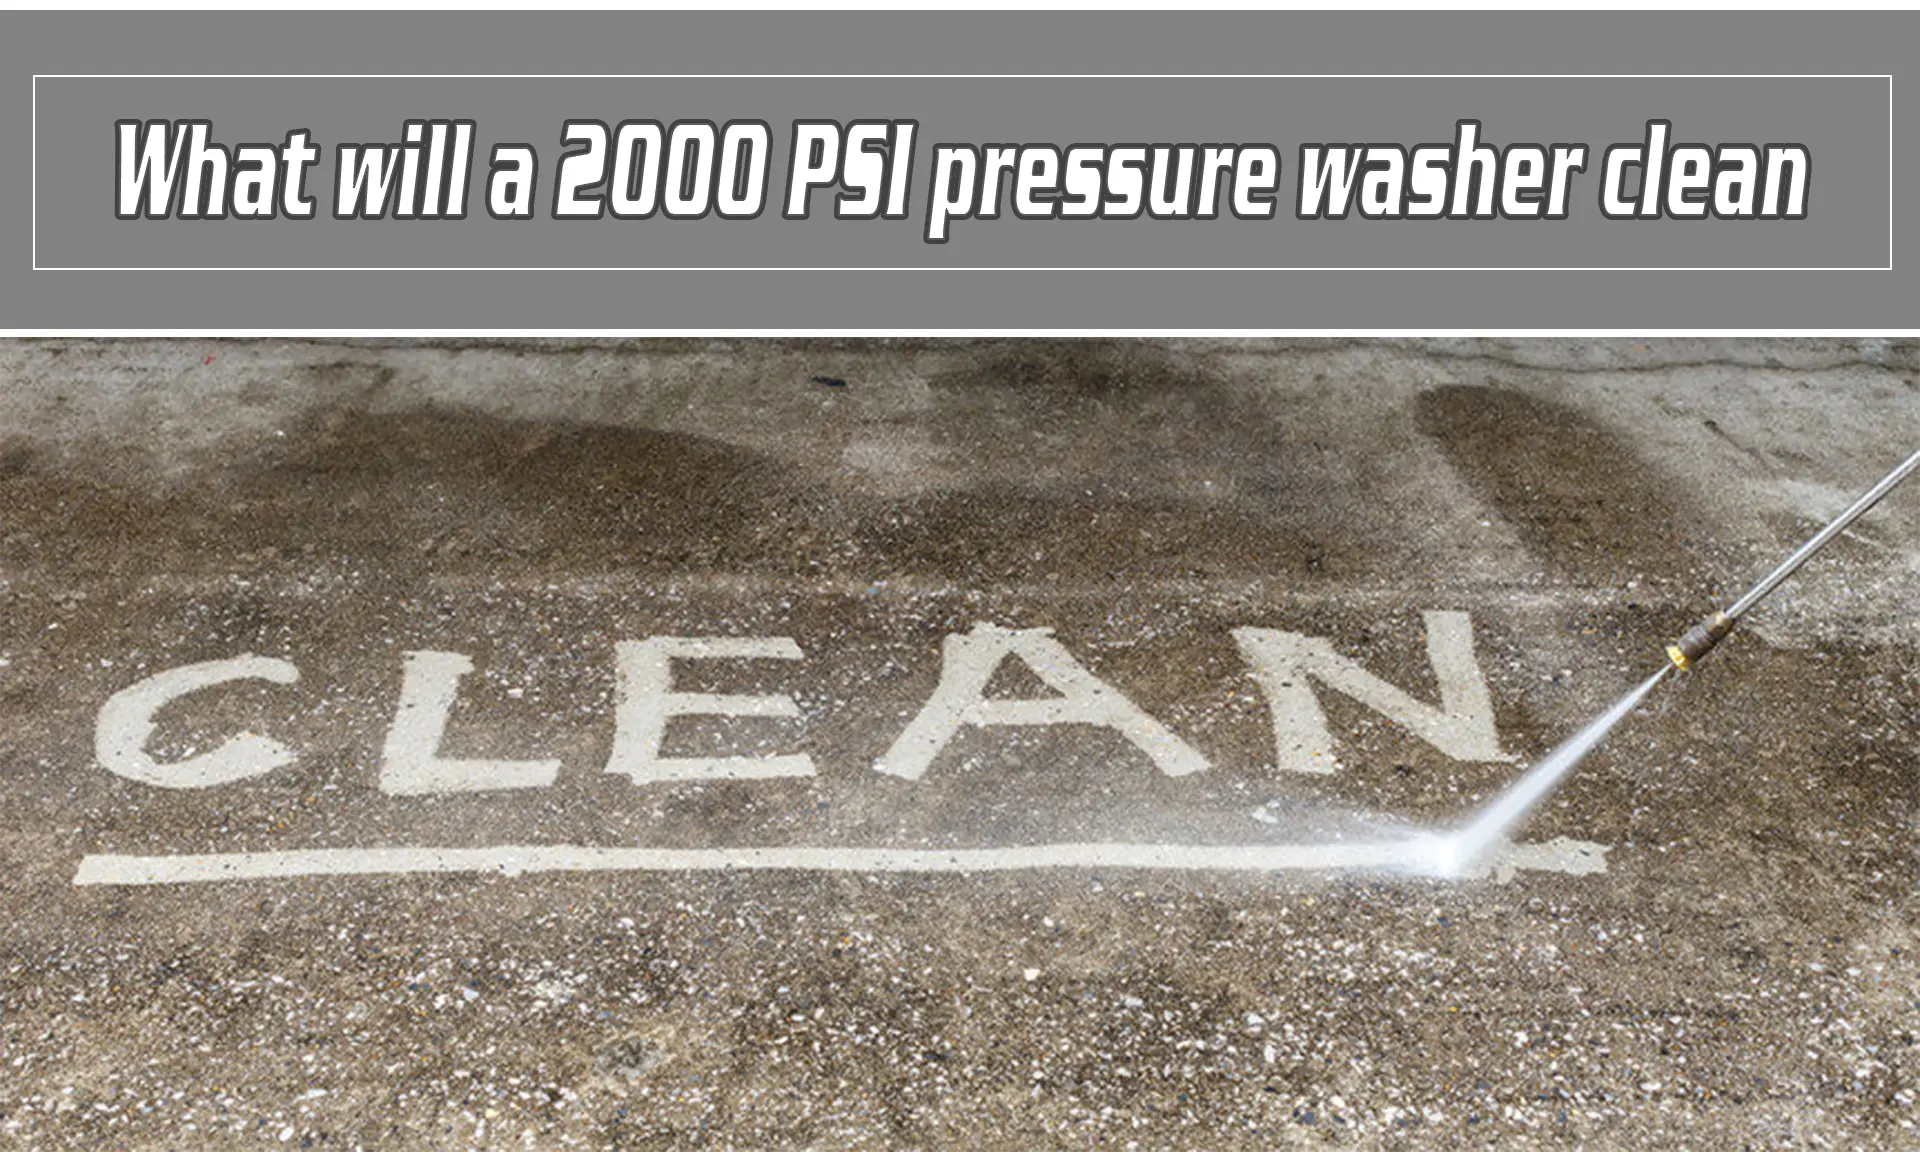 What will a 2000 PSI pressure washer clean